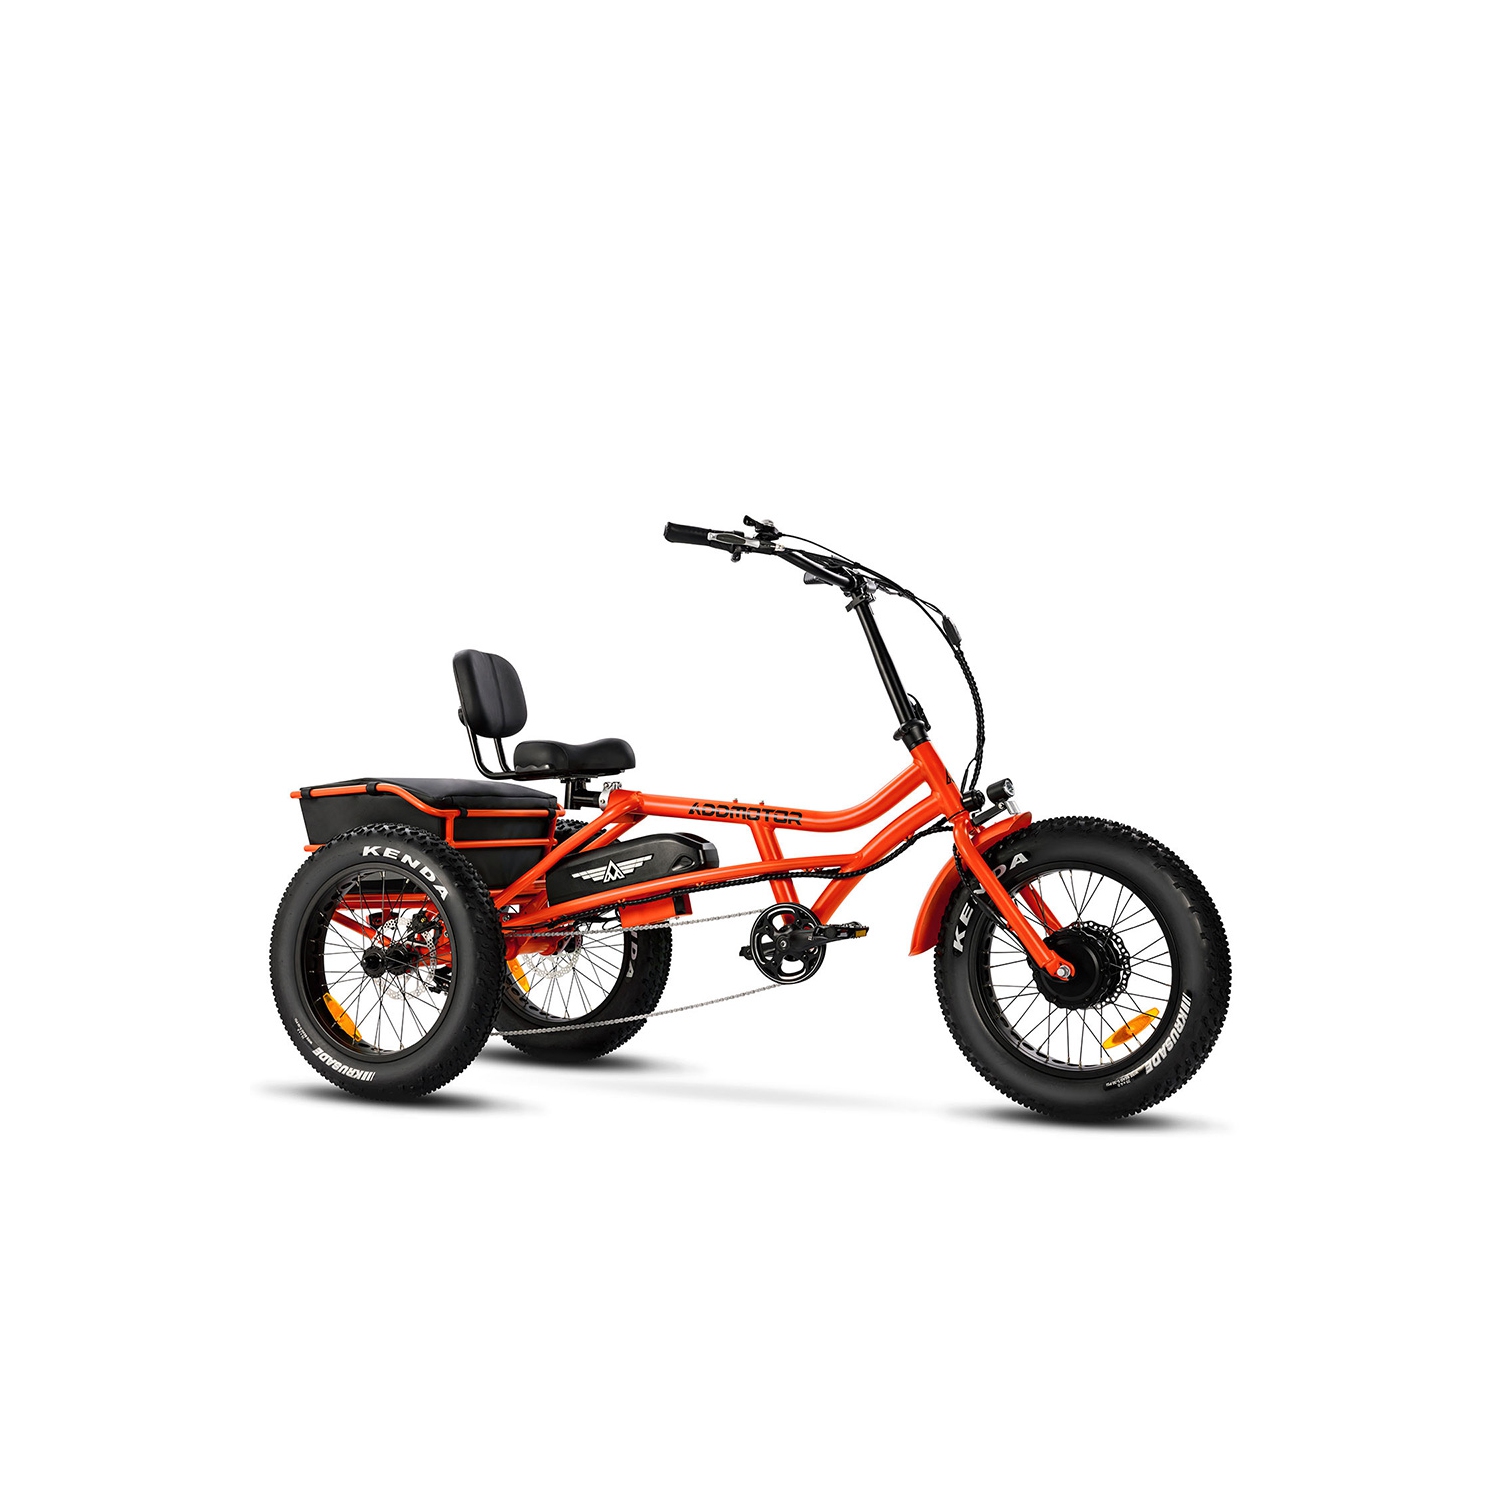 Addmotor M-360 Electric Fat Tire Tricycle, 750W 48V 20Ah Electric Trikes for Adults, 20 Inch 3 Wheels Power E-Bike with Rear Cargo Basket, Orange